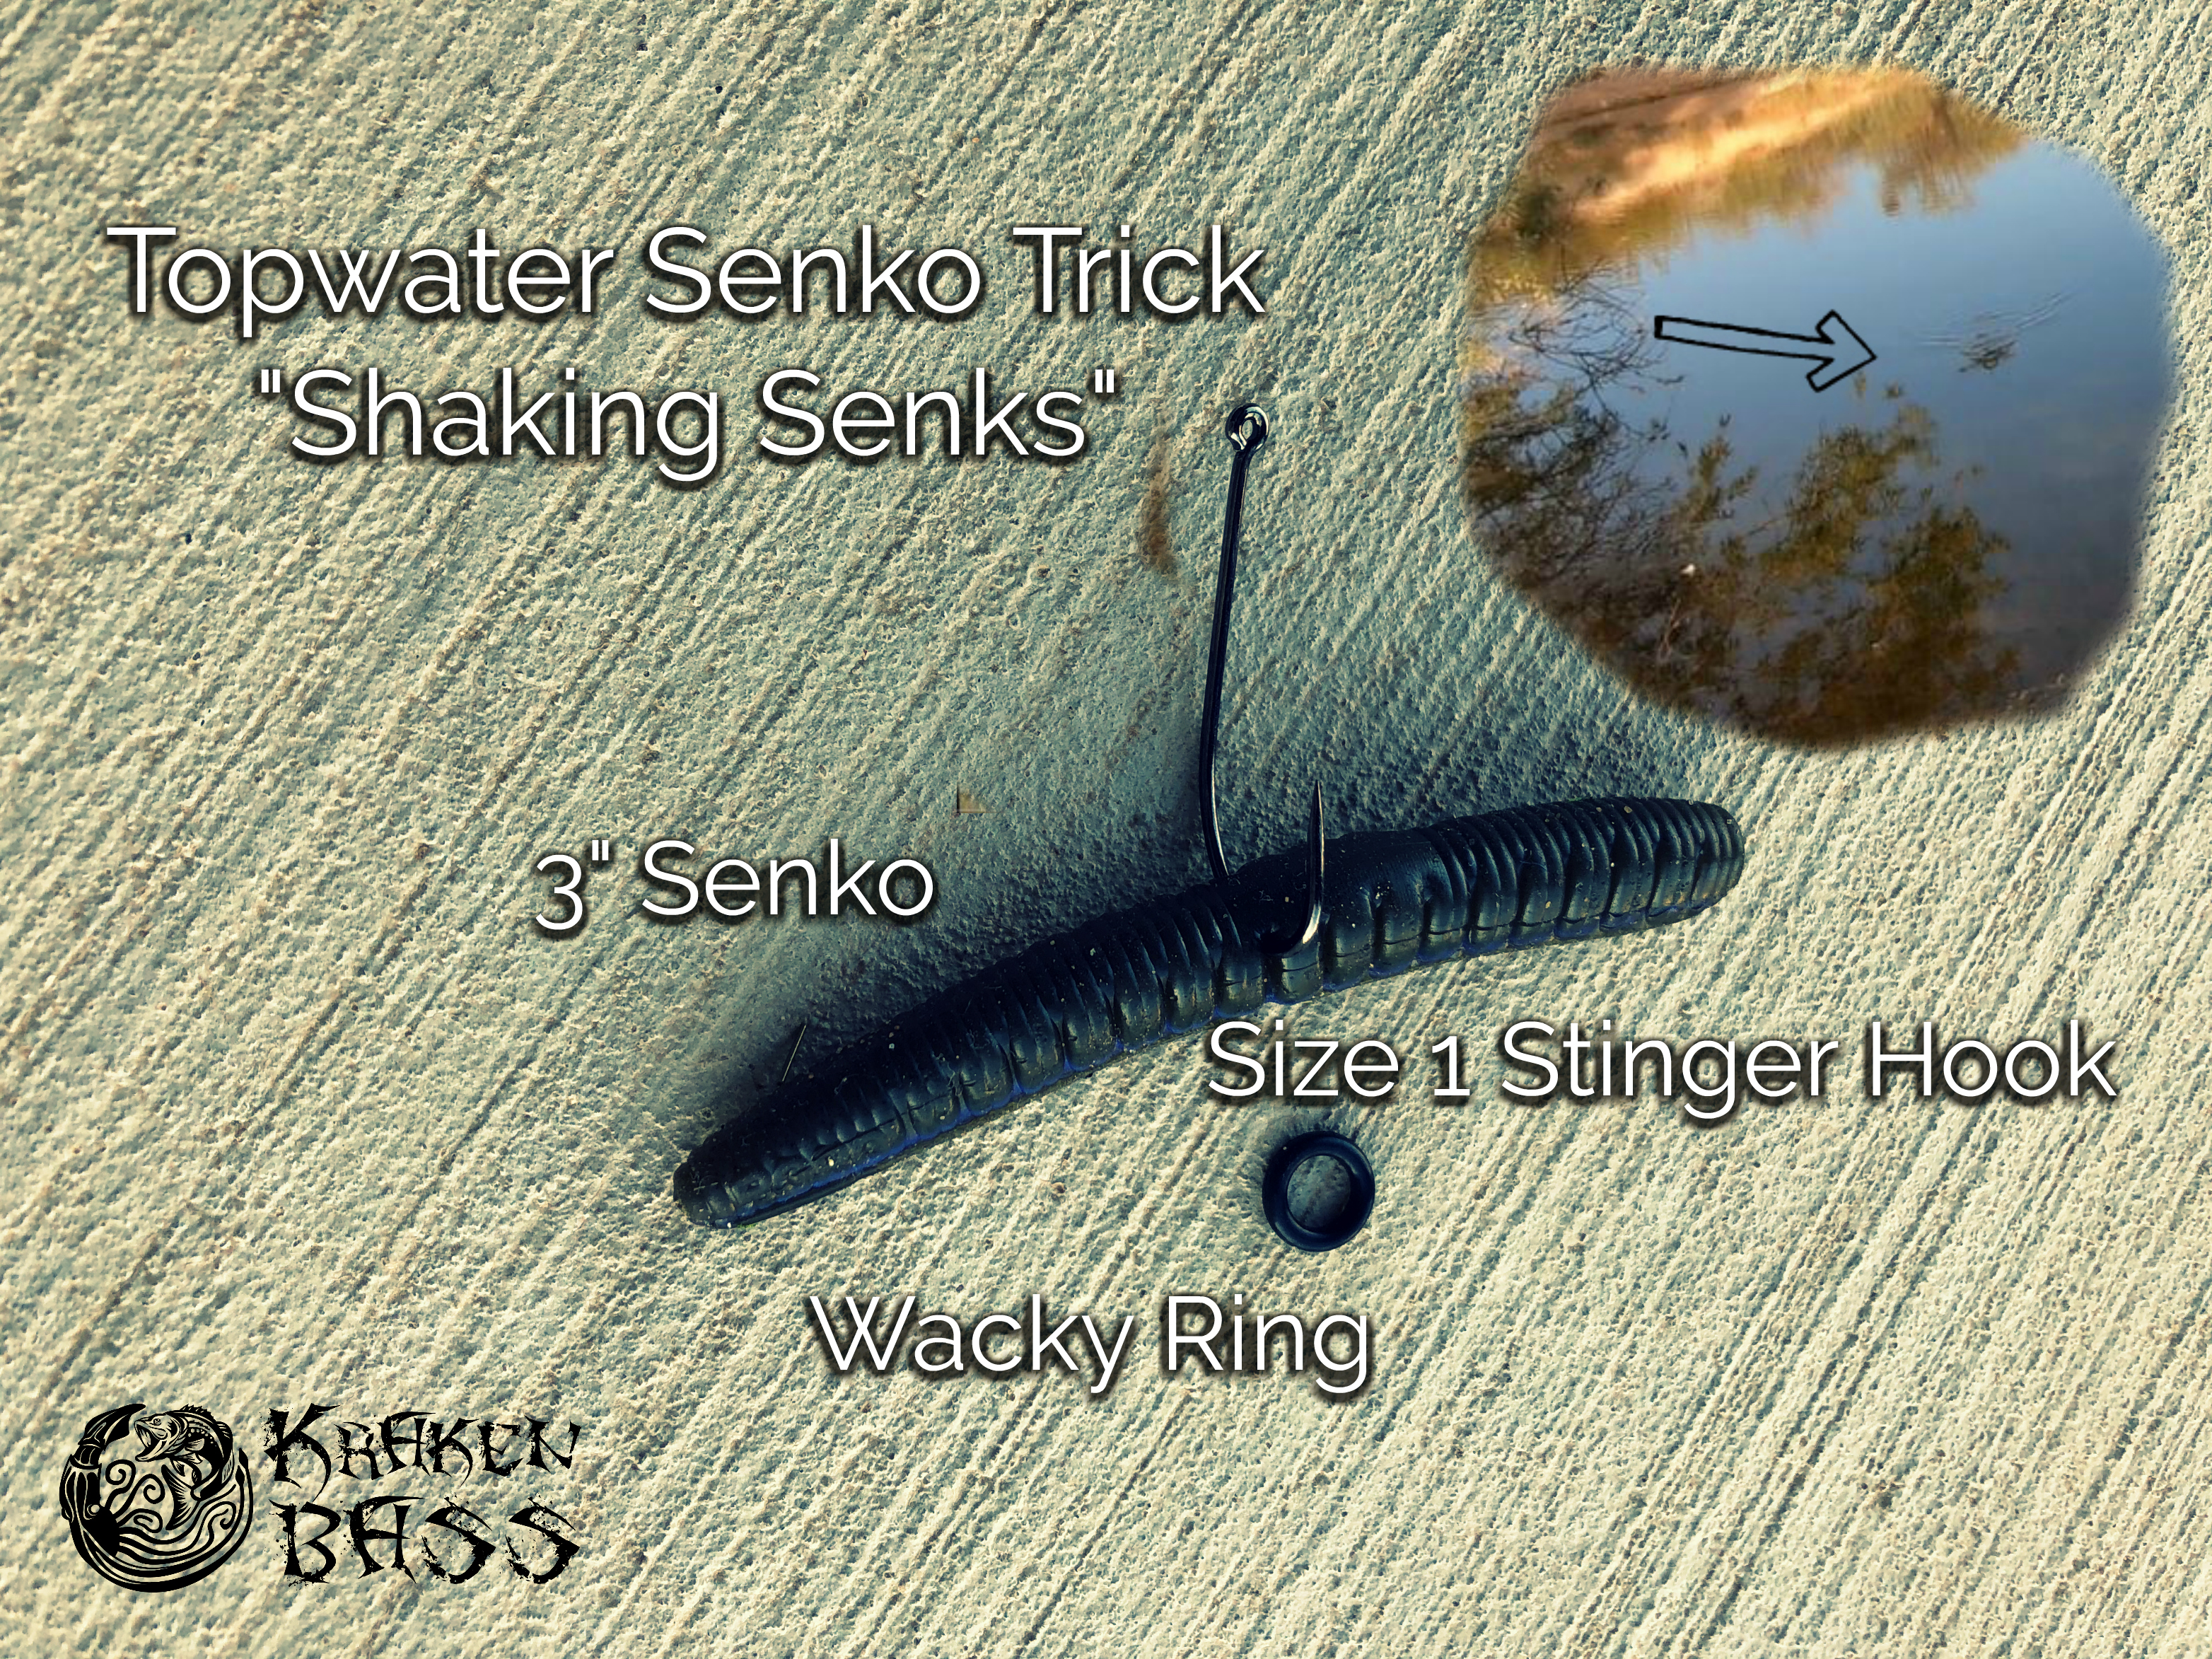 Wacky Rig Fishing: From Setup to Catch to Retrieval